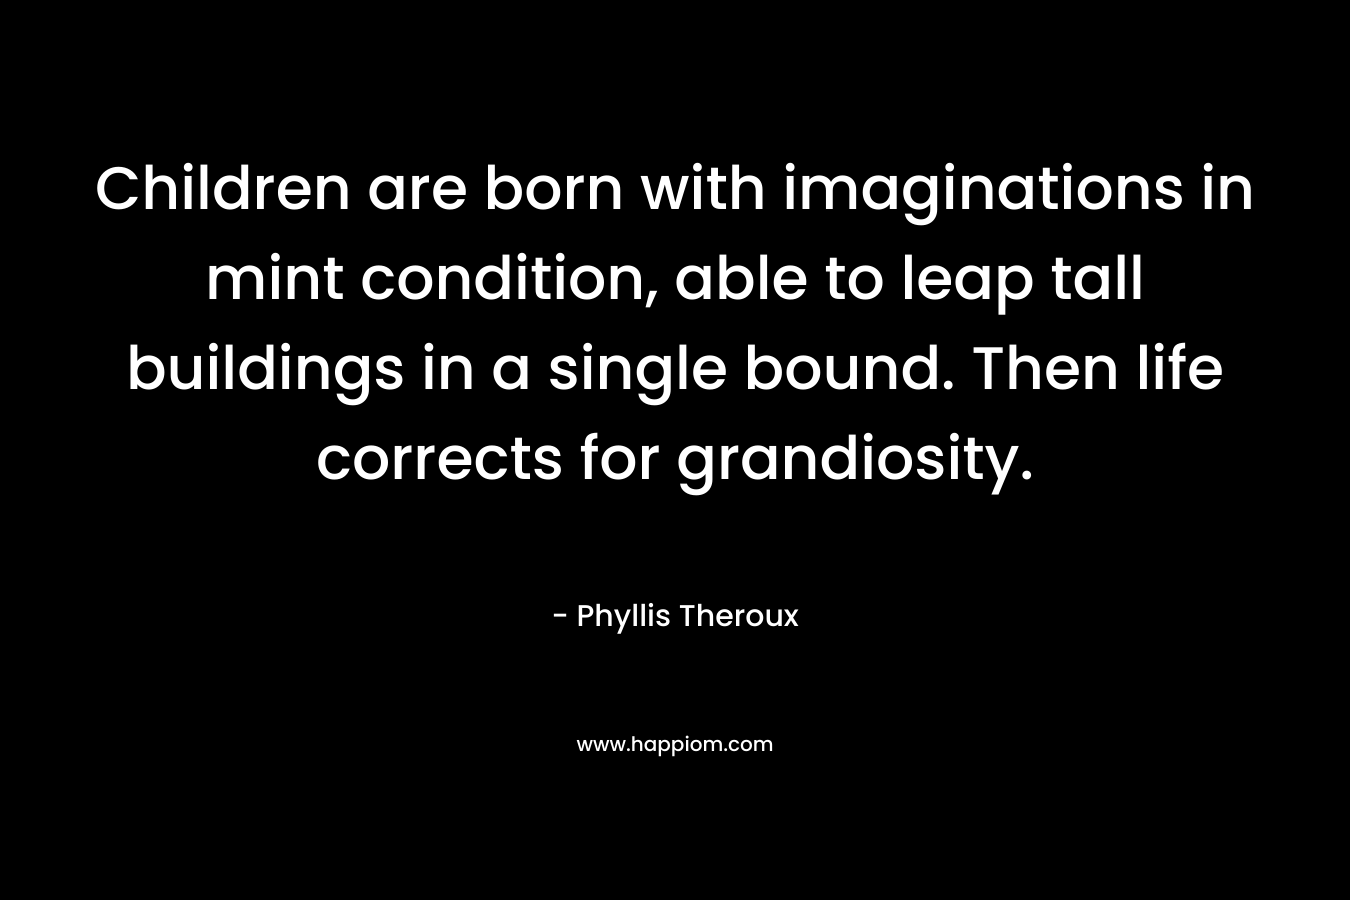 Children are born with imaginations in mint condition, able to leap tall buildings in a single bound. Then life corrects for grandiosity.